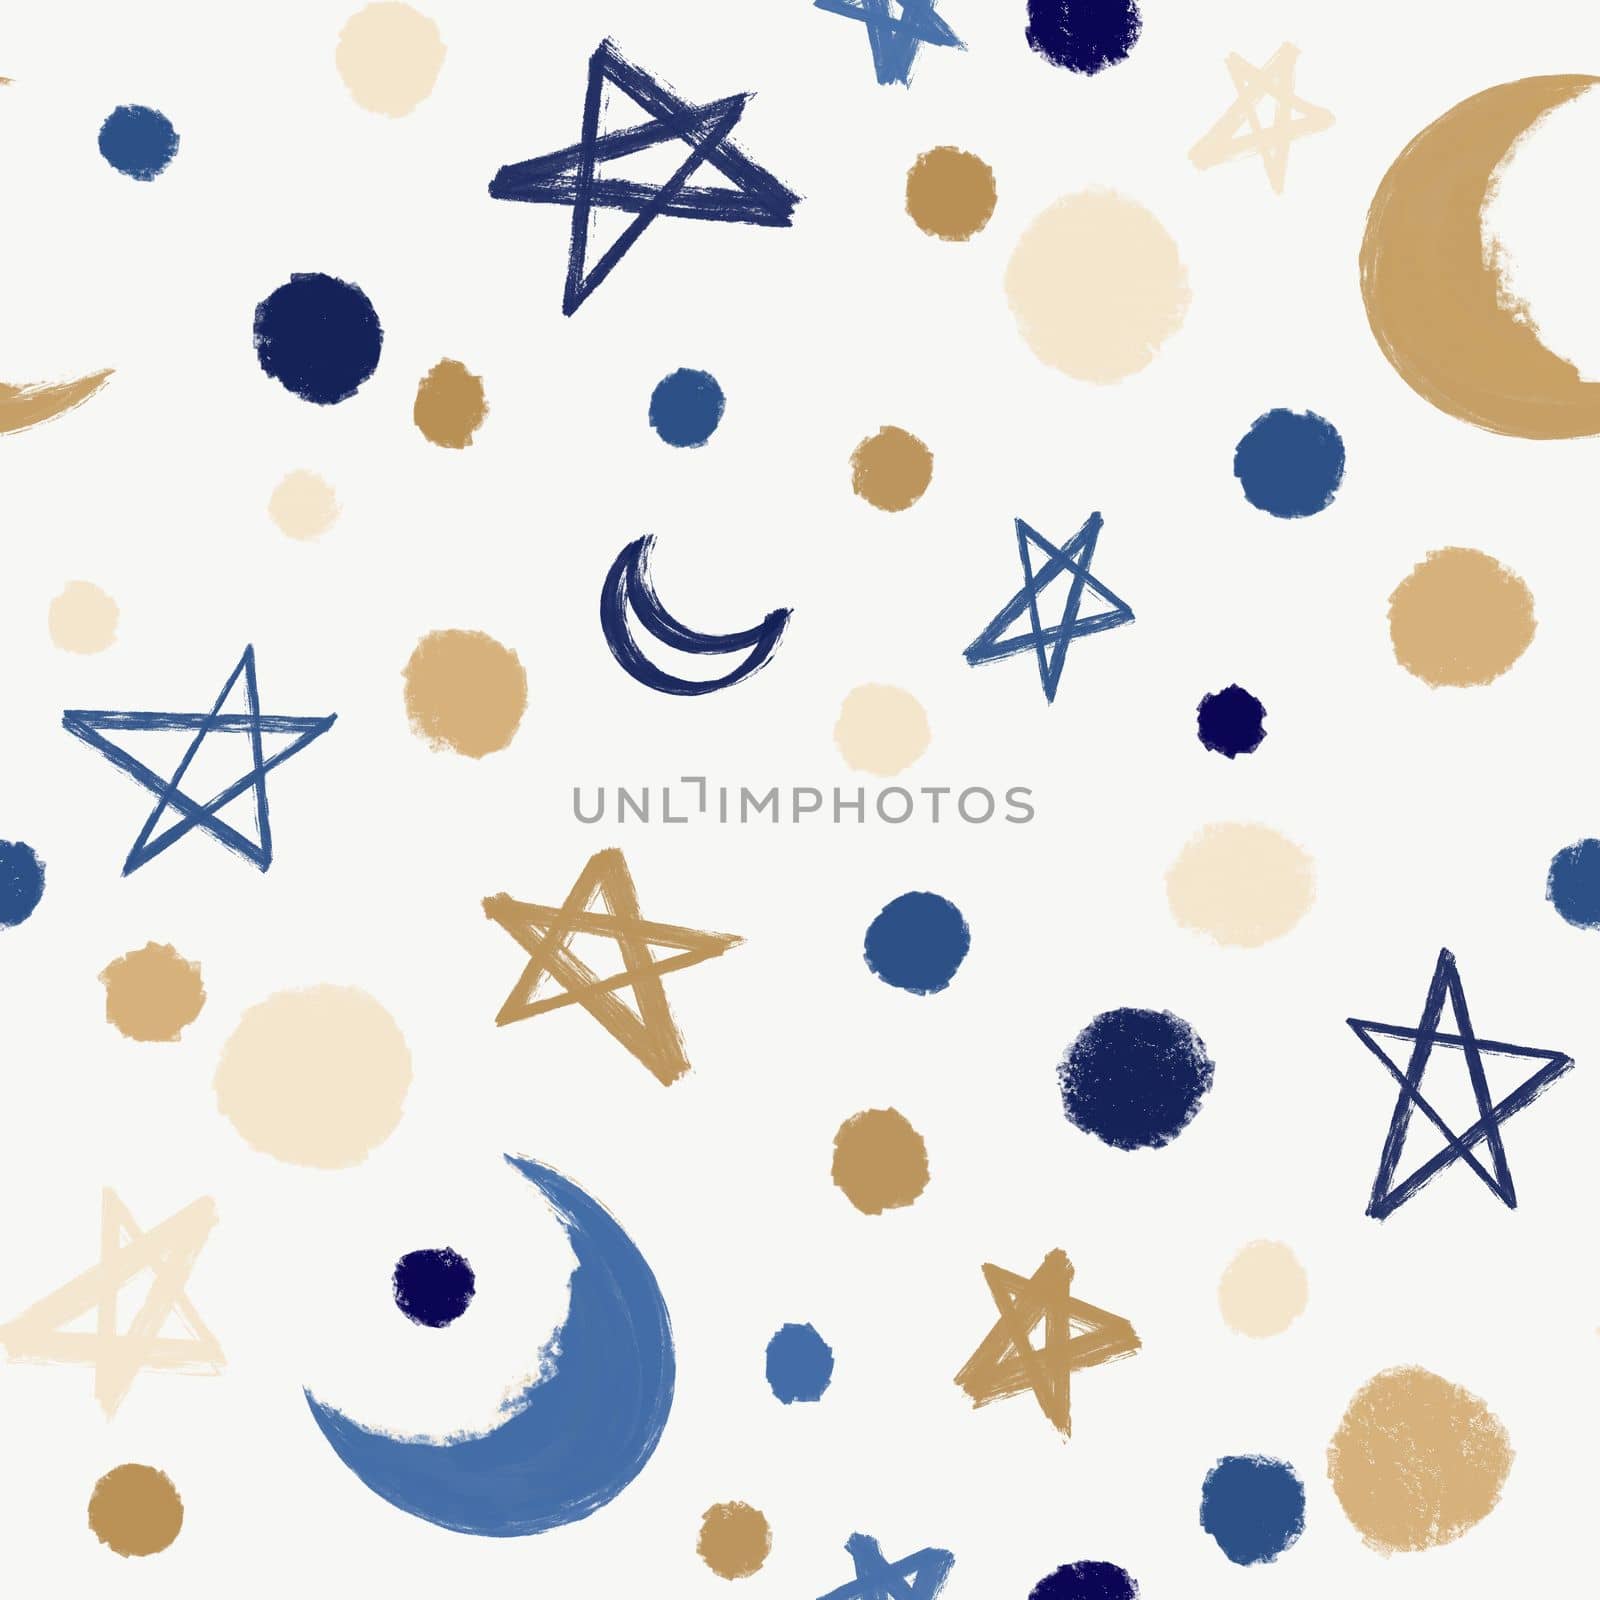 Festive Seamless festive backdrop with moon, stars and doodles. Christmas background for wrapping paper, surface textures, scrapbook